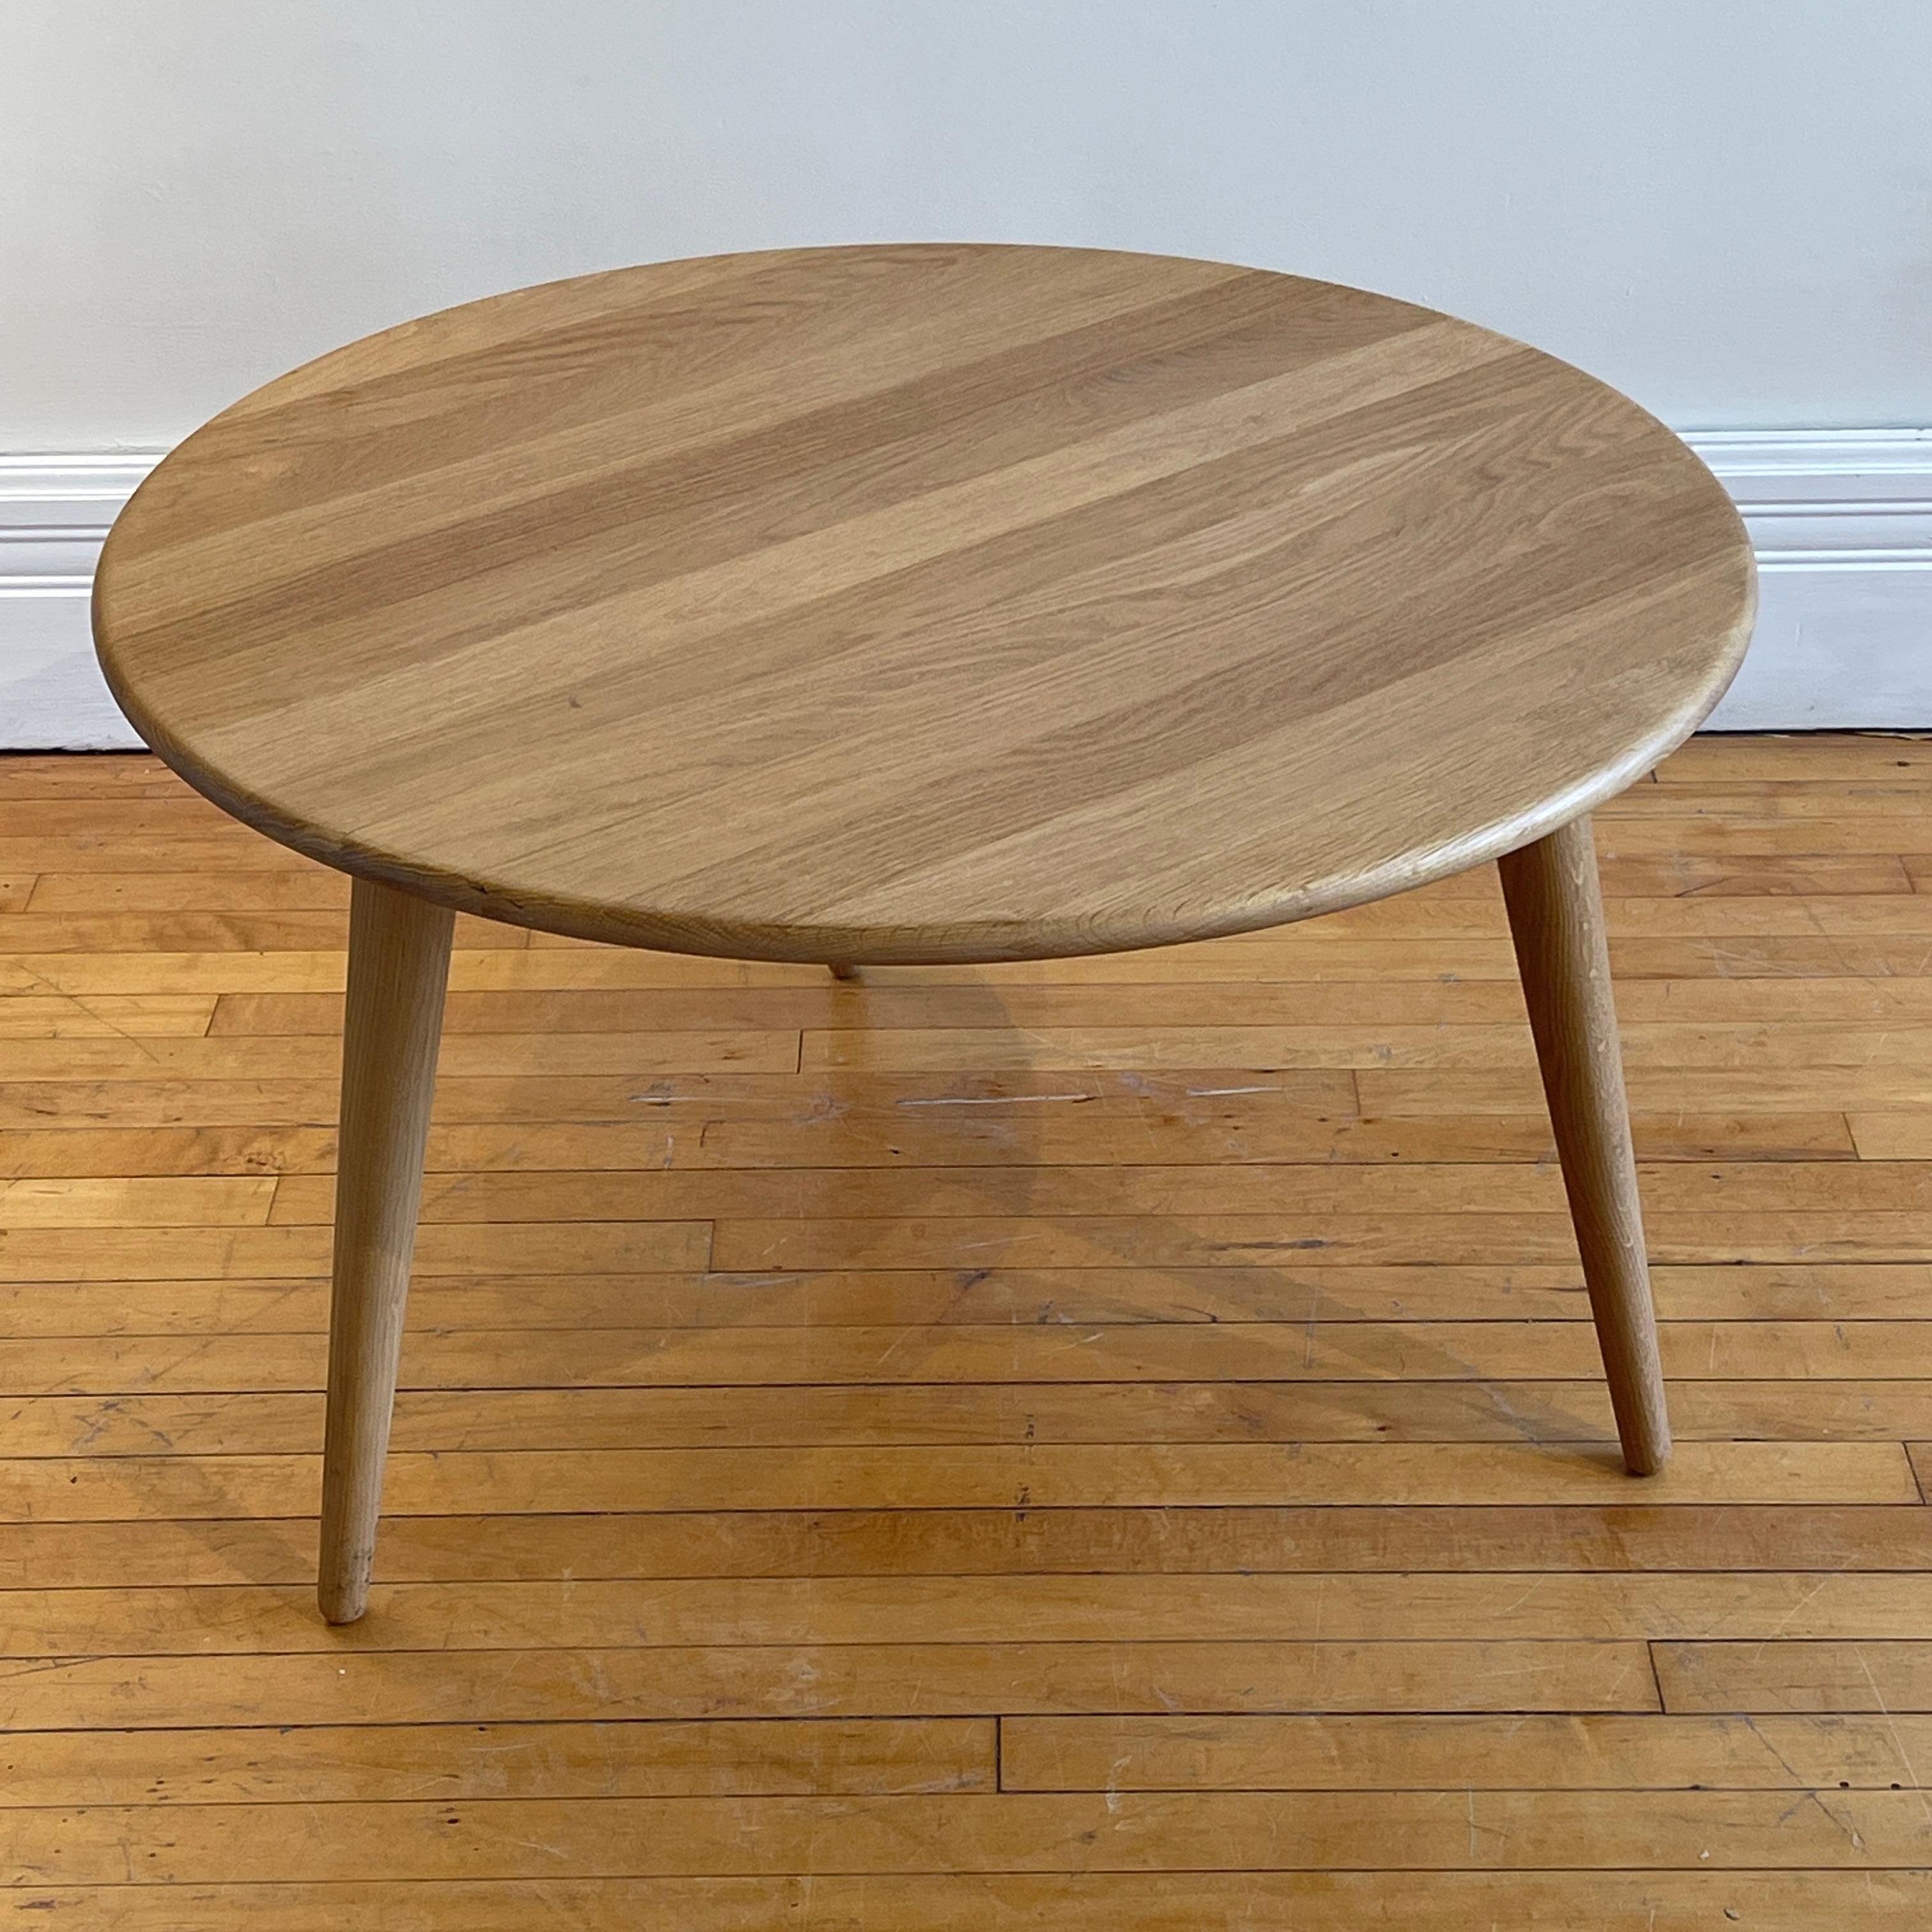 CH008 table

Design Hans Wegner, 1954
Made in Denmark by Carl Hansen & Son 

This table is still in production- this specific size currently sells new at Carl Hansen and Sons for $3075

The example we are selling is in excellent preowned